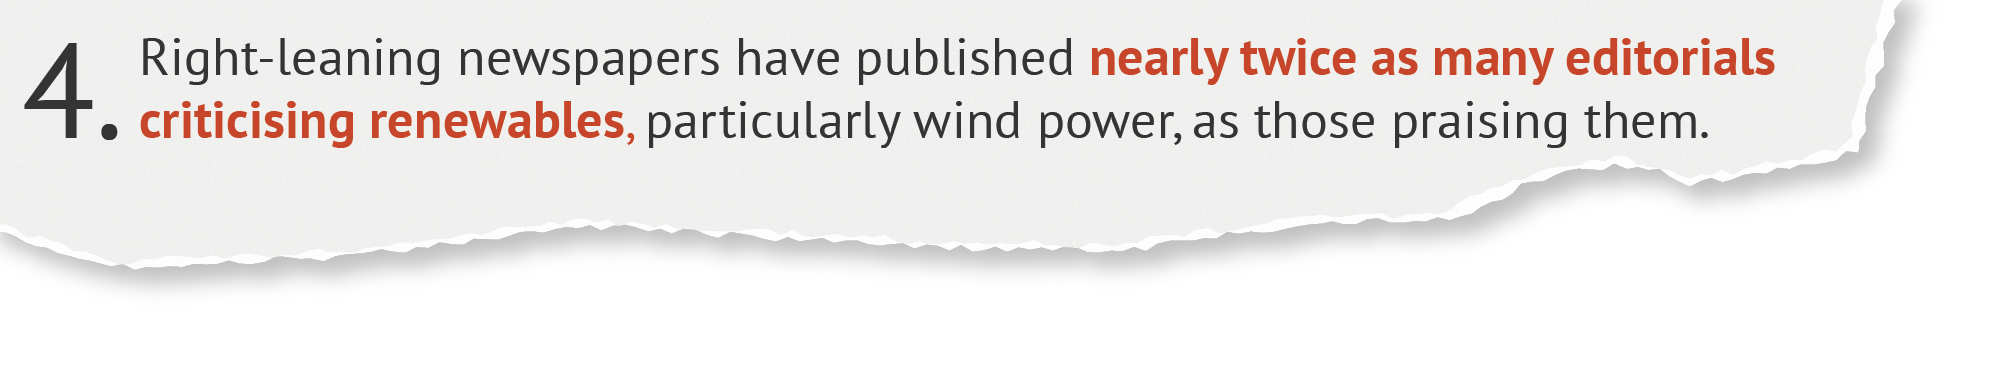 Right-leaning editorials have published nearly twice as many editorials criticising renewables, particularly wind power, as those praising them.